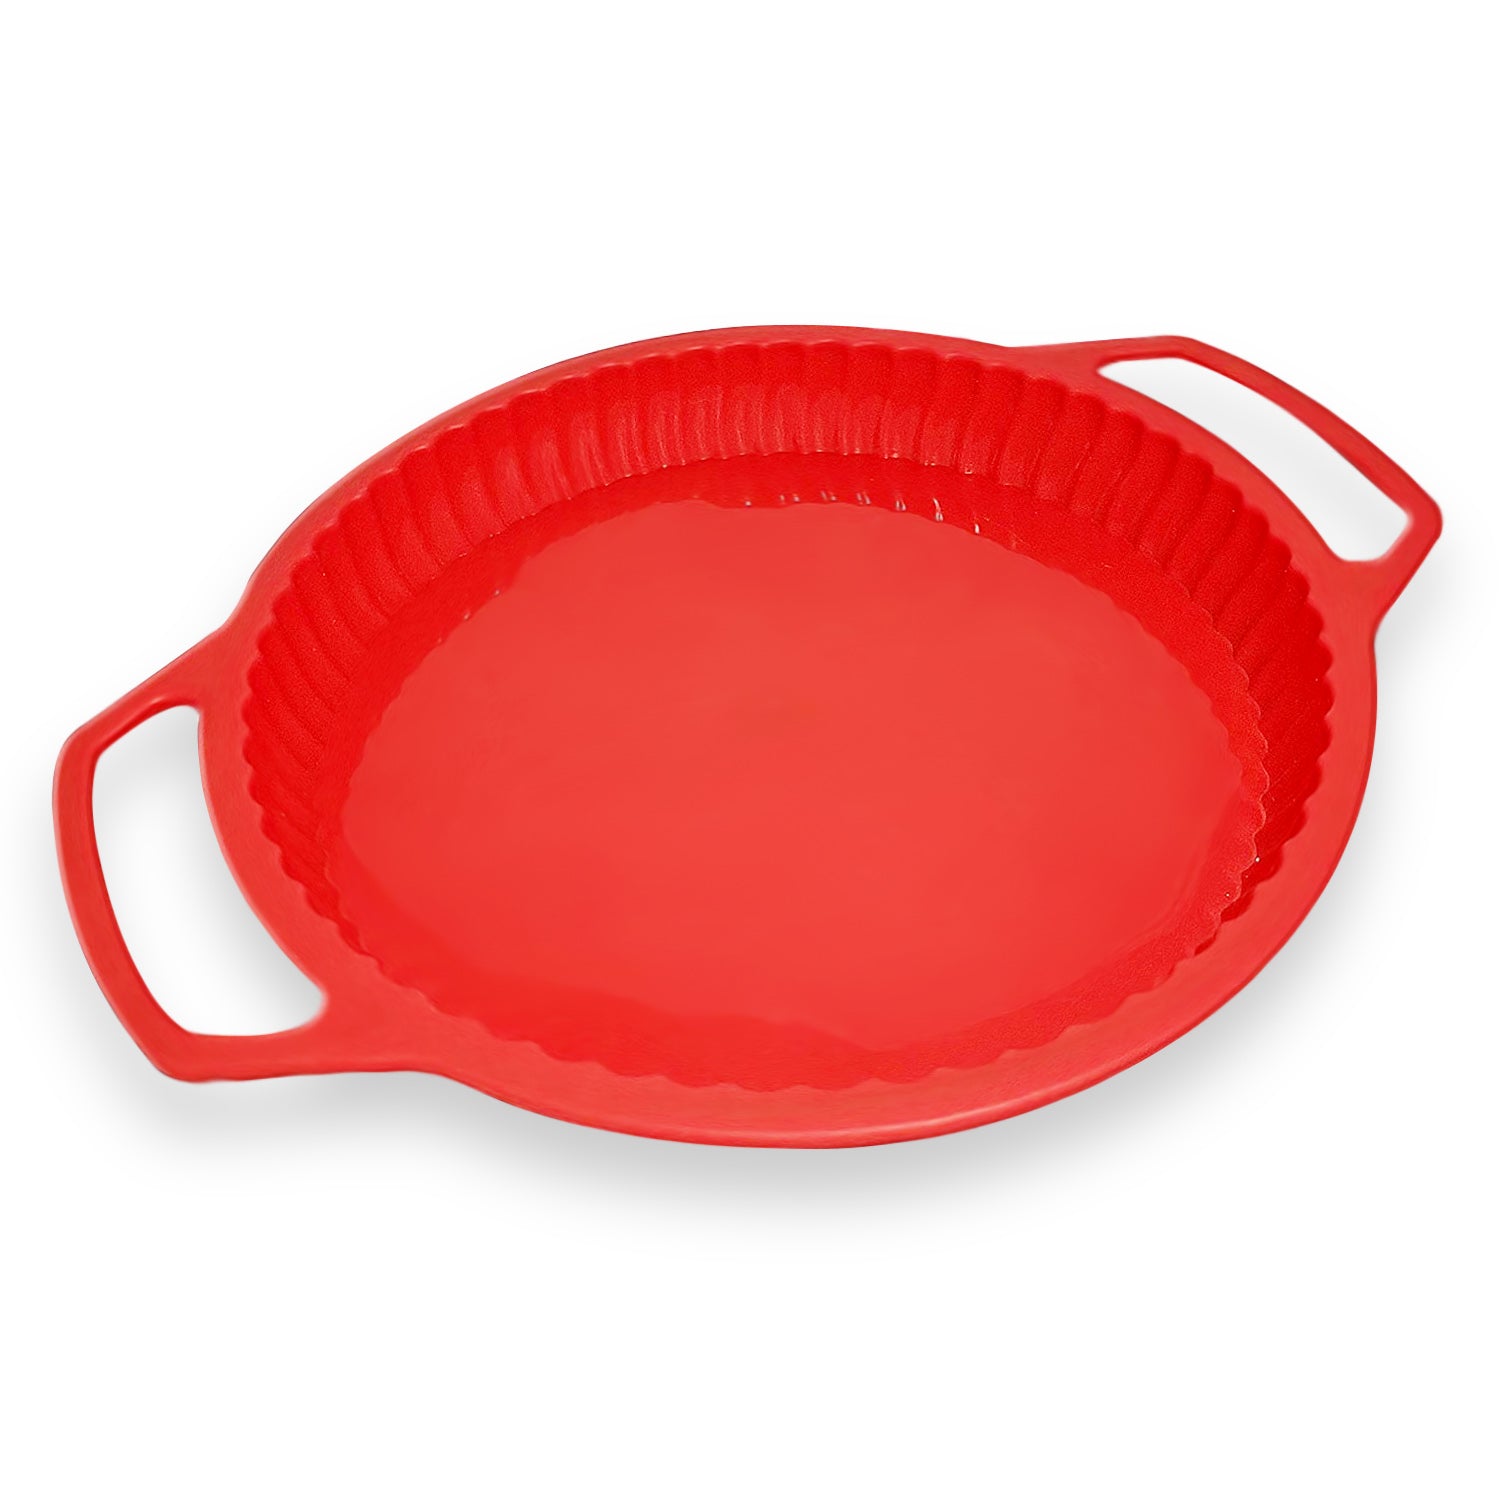 Elbee Baking Non Stick Durable Silicone Pie Pans Set, Thick Steel  Reinforced Rim for Easy and Stable Movement, Great for Pies, Cake, Quiche,  Tart and